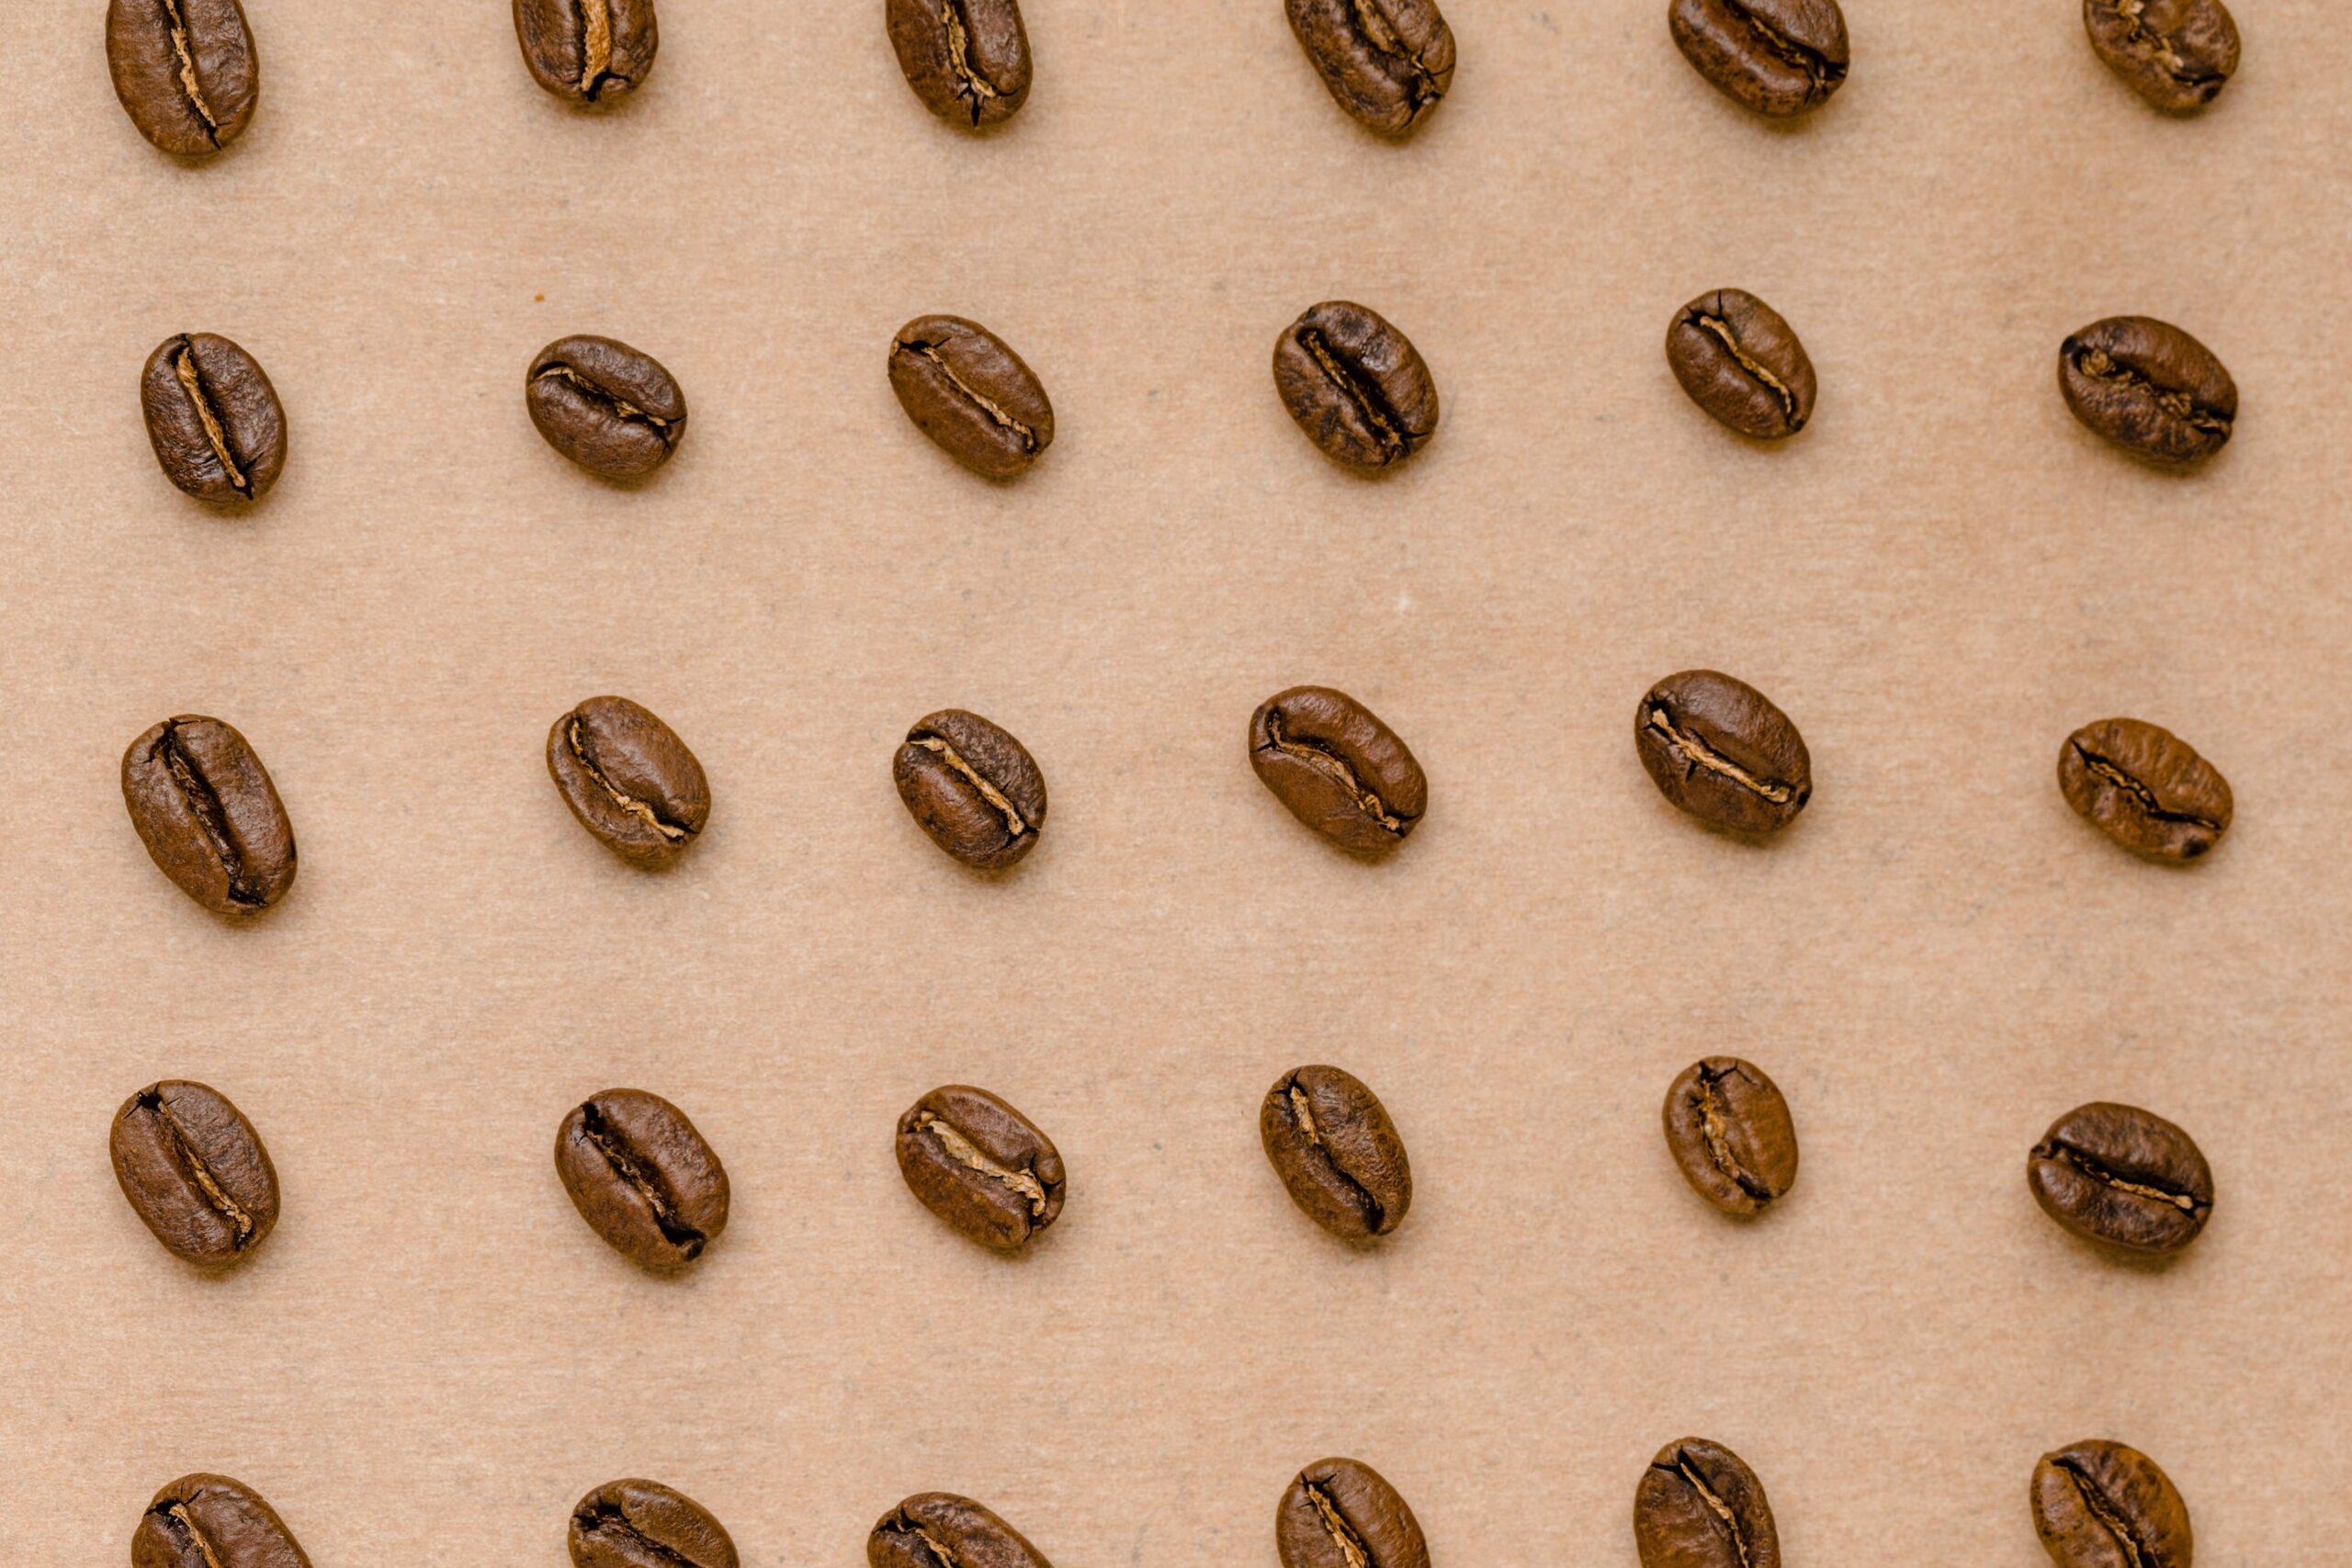 Coffee beans arranged in rows on a brown background